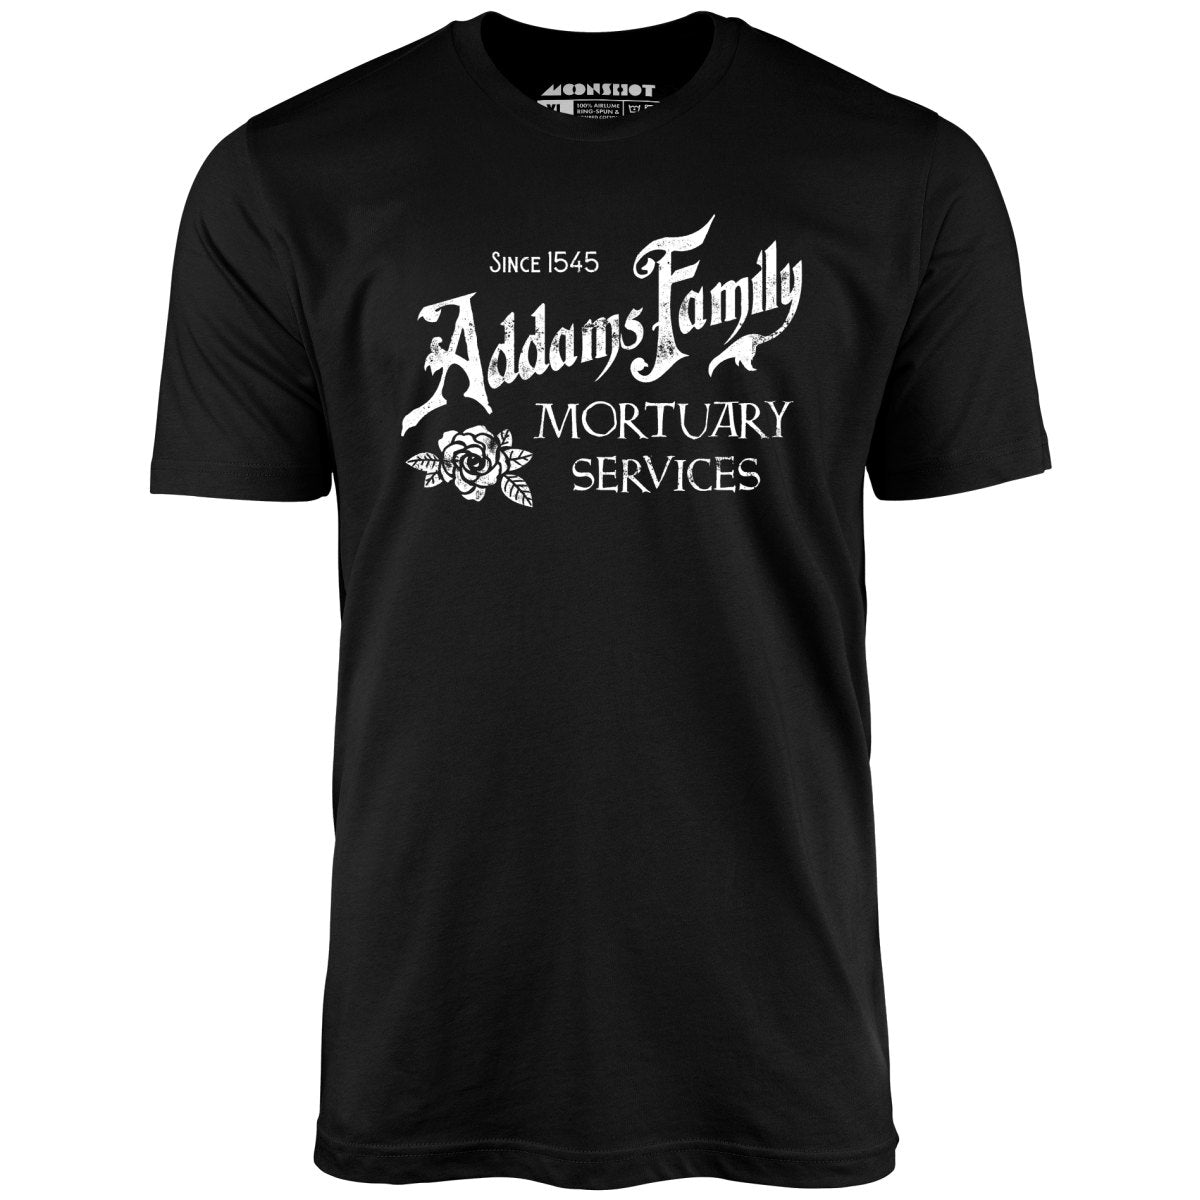 Addams Family Mortuary Services - Unisex T-Shirt